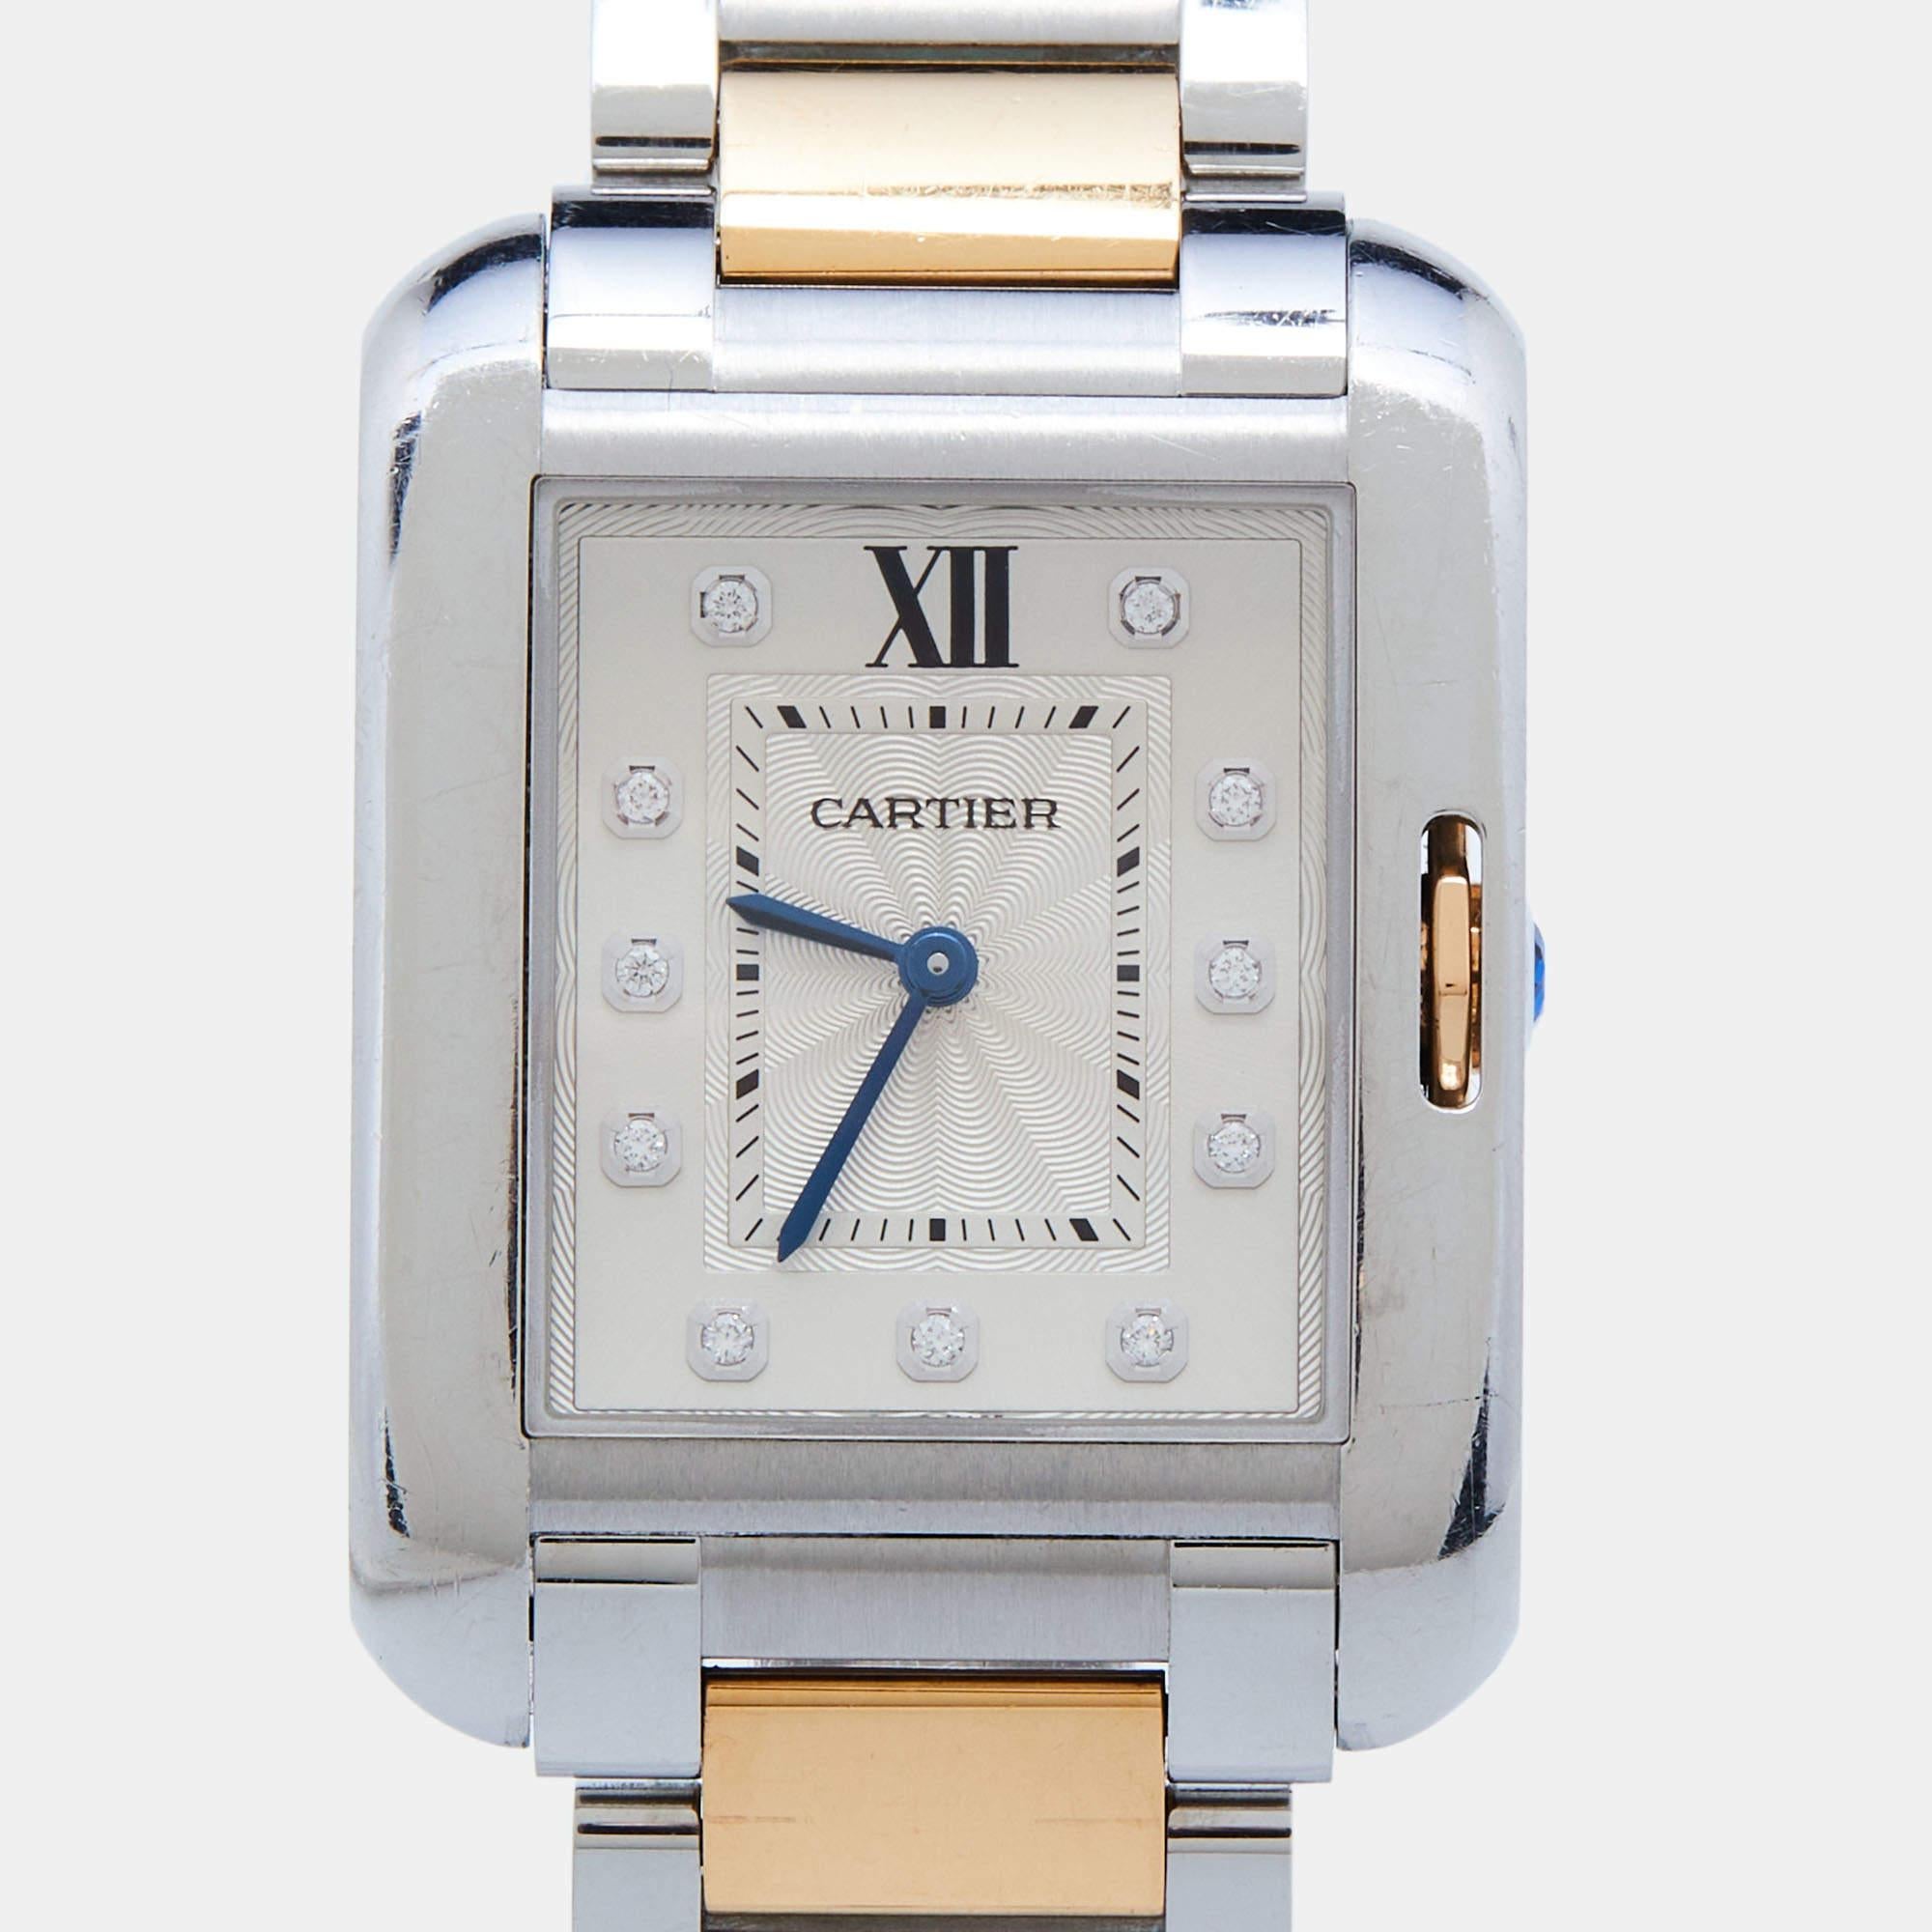 This Cartier timepiece is a must-have creation for watch enthusiasts! Made using 18k rose gold and stainless steel, this Tank Anglaise watch has a silver dial with diamond hour markers, a Roman numeral marker at 12, and steel hands in a blue hue.